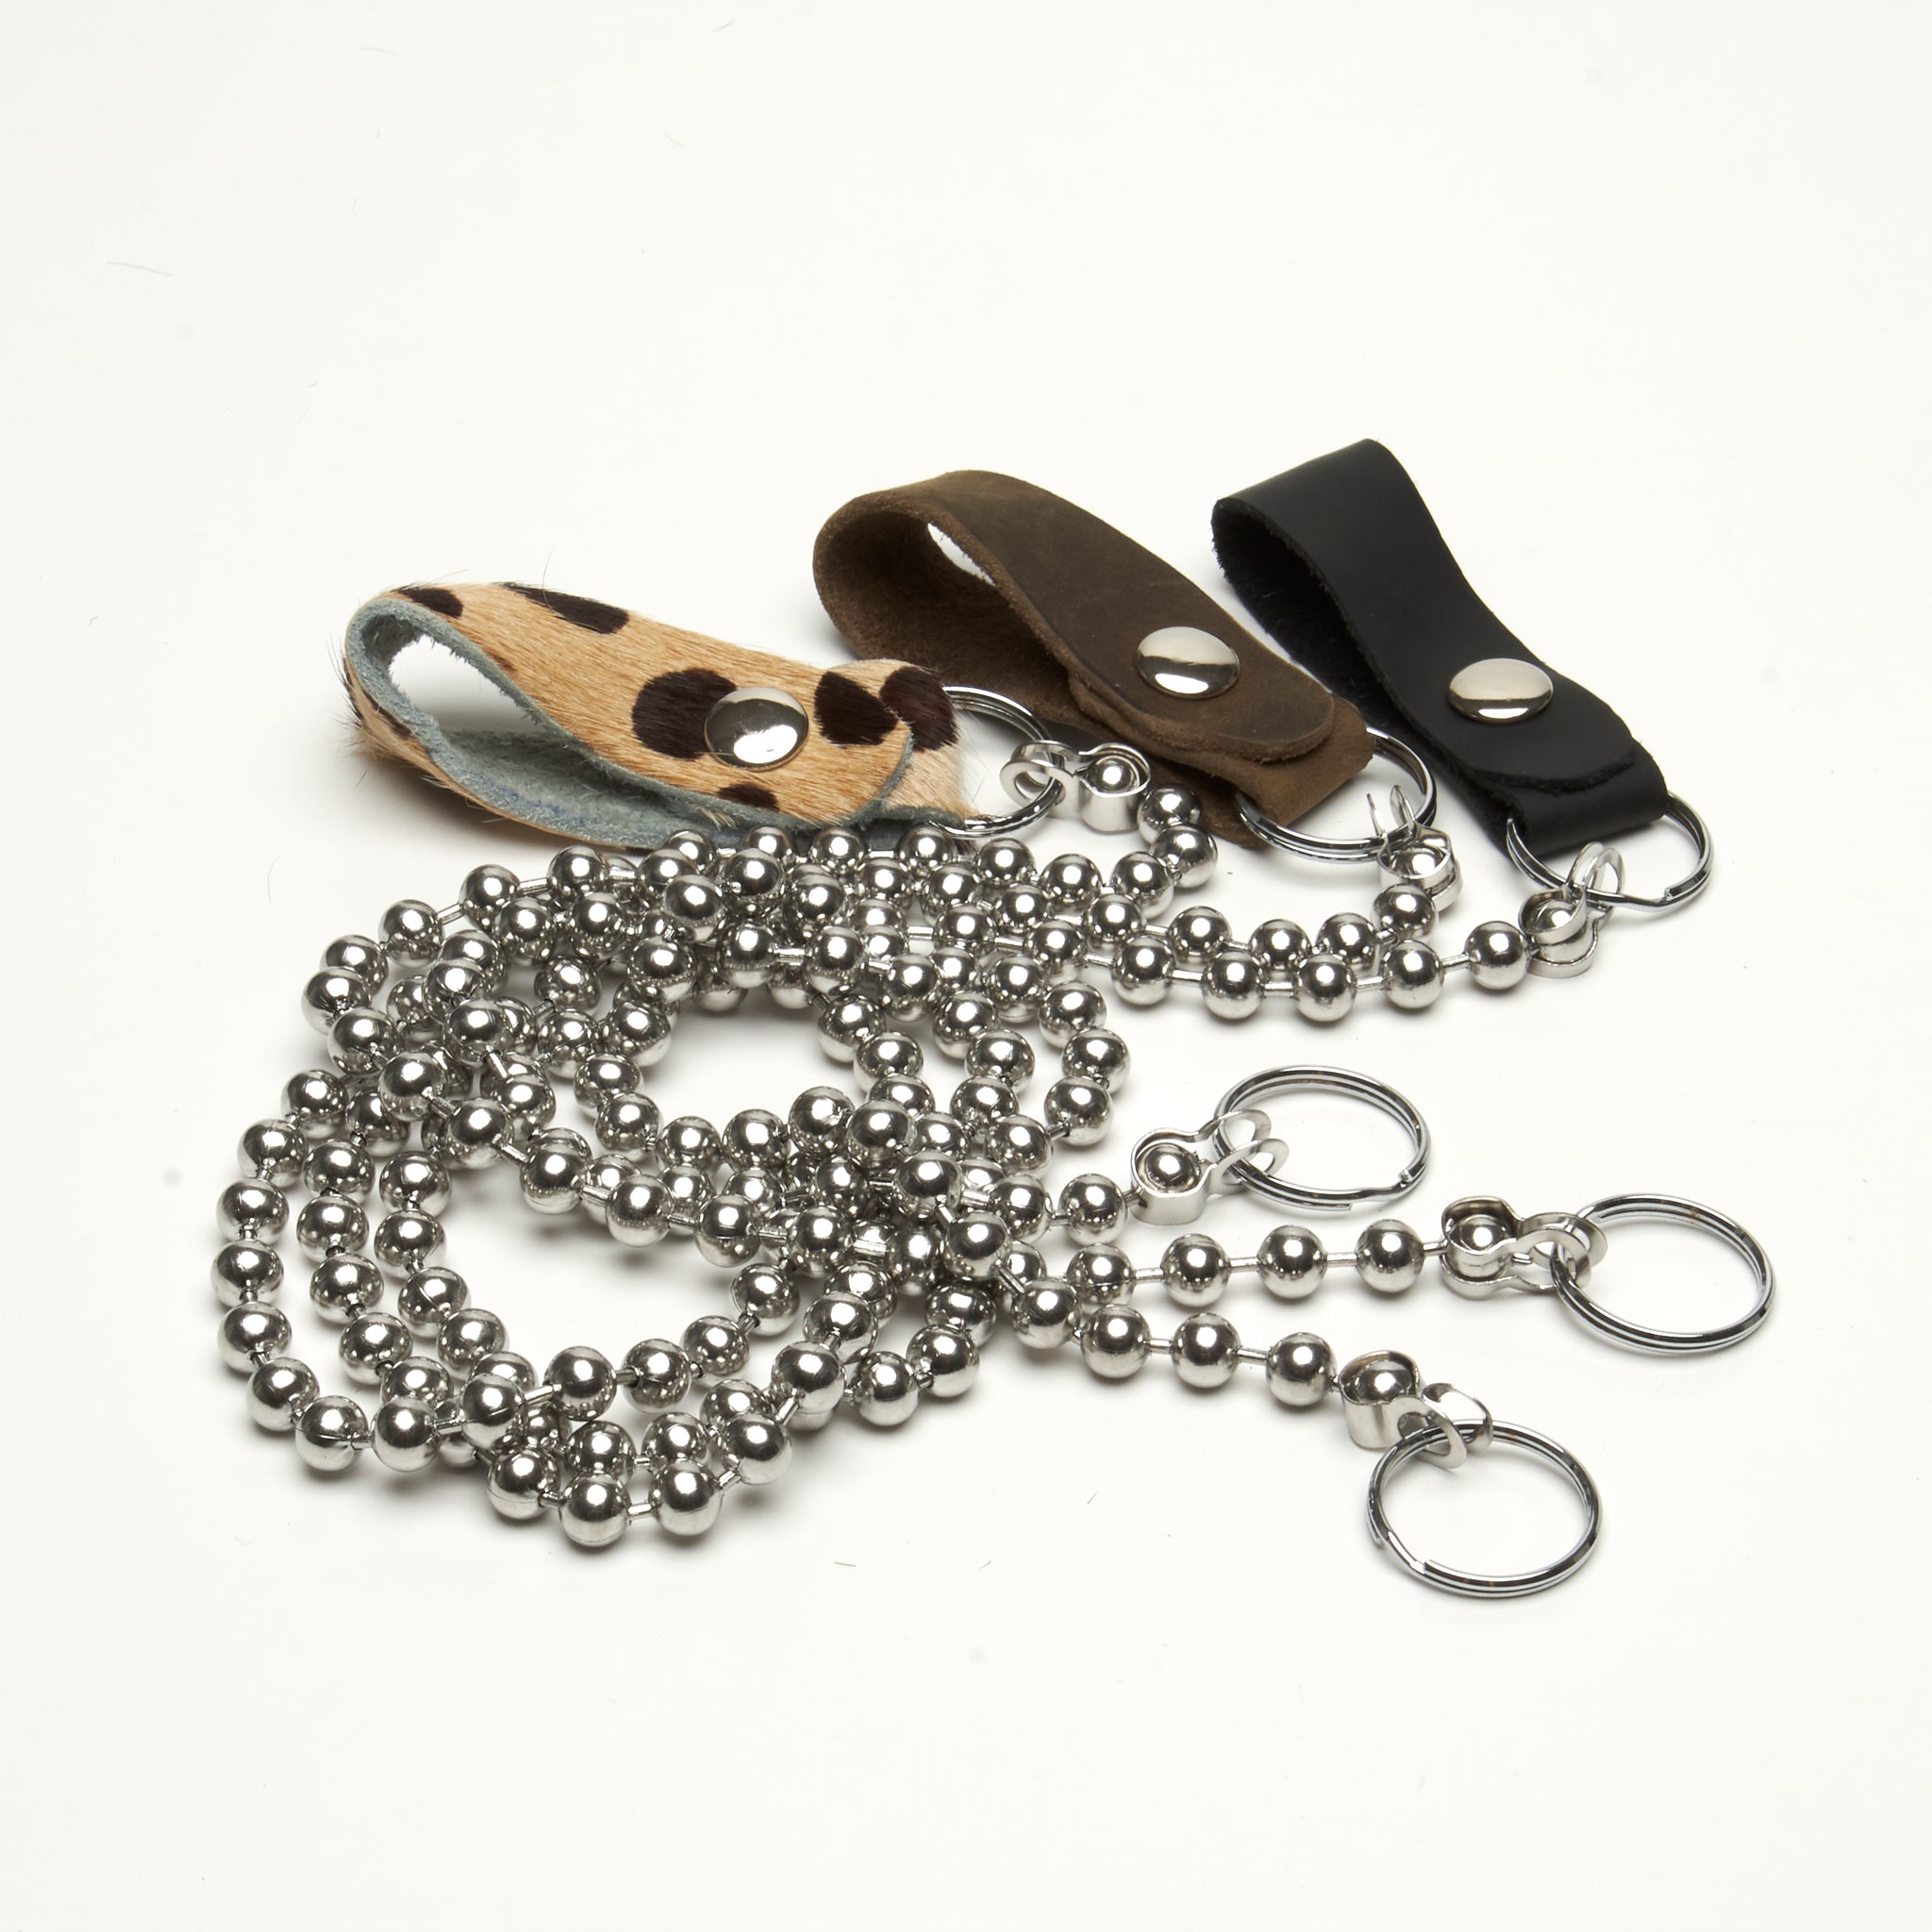 WALLET CHAIN 8 MM STAINLESS STEEL BALL BEADS WITH LEATHER SNAP CLOSURE. By NYET Jewelry.